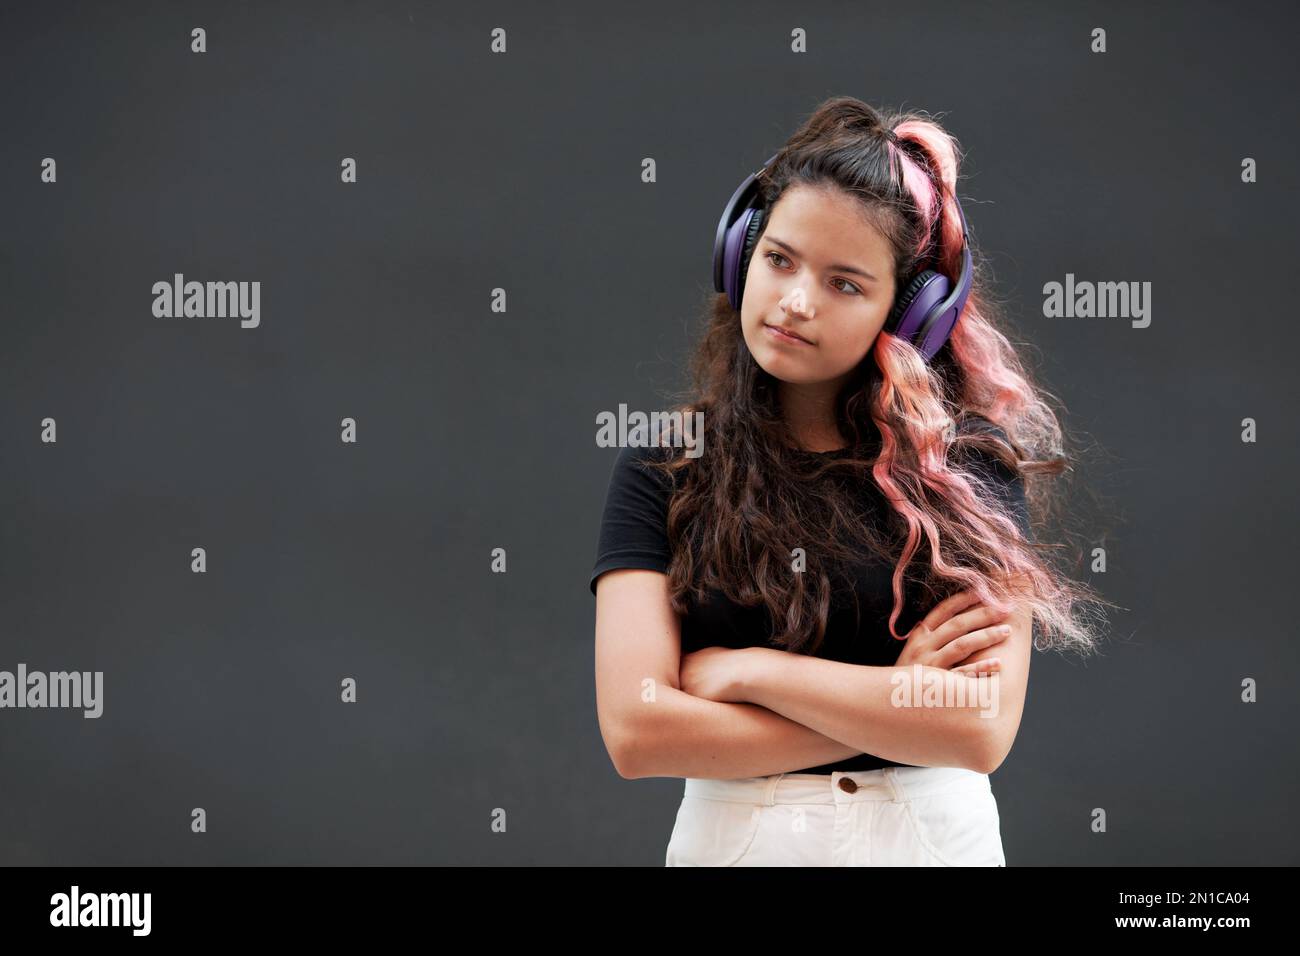 Young Girl with colored long pink hair listen to music with headphones isolated on dark gray background Stock Photo